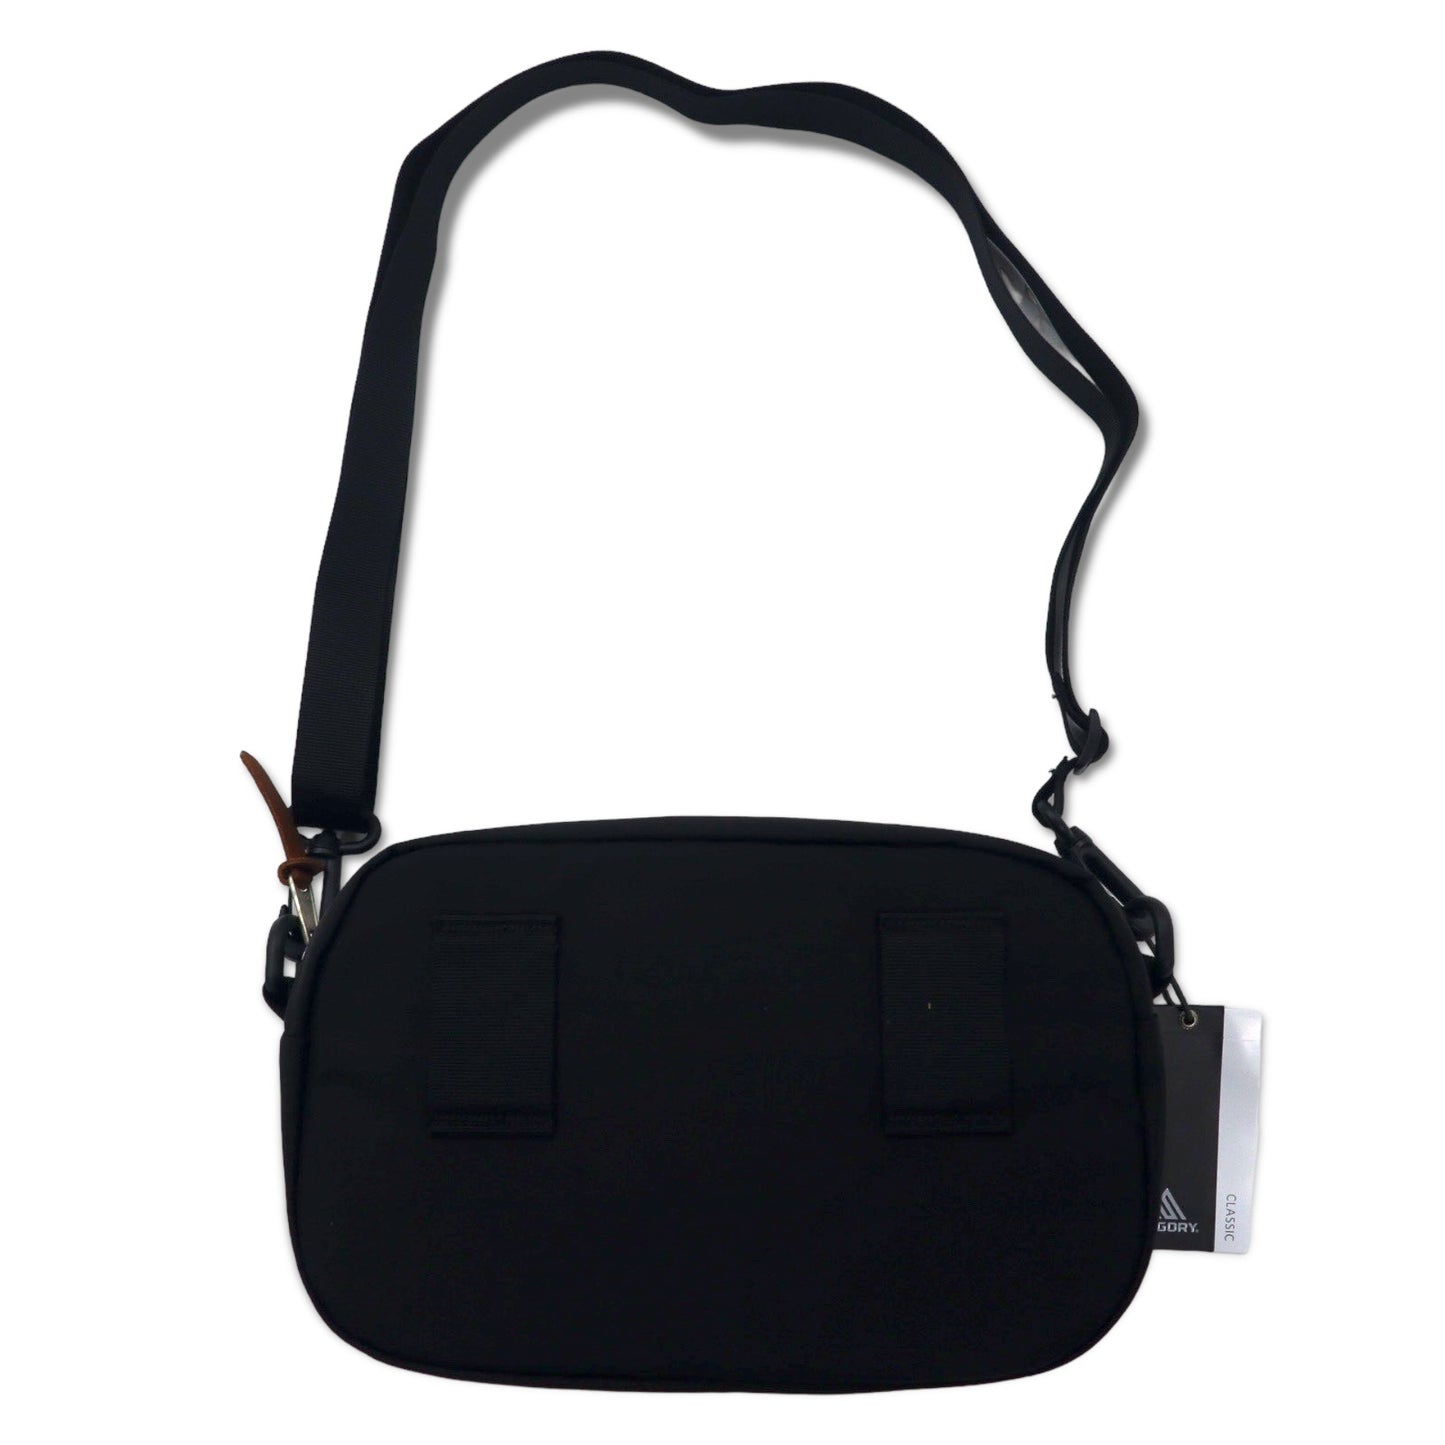 GREGORY パデッド ショルダーバッグ ポーチ ブラック ナイロン GREGORY PADDED SHOULDER POUCH M 5974 未使用品